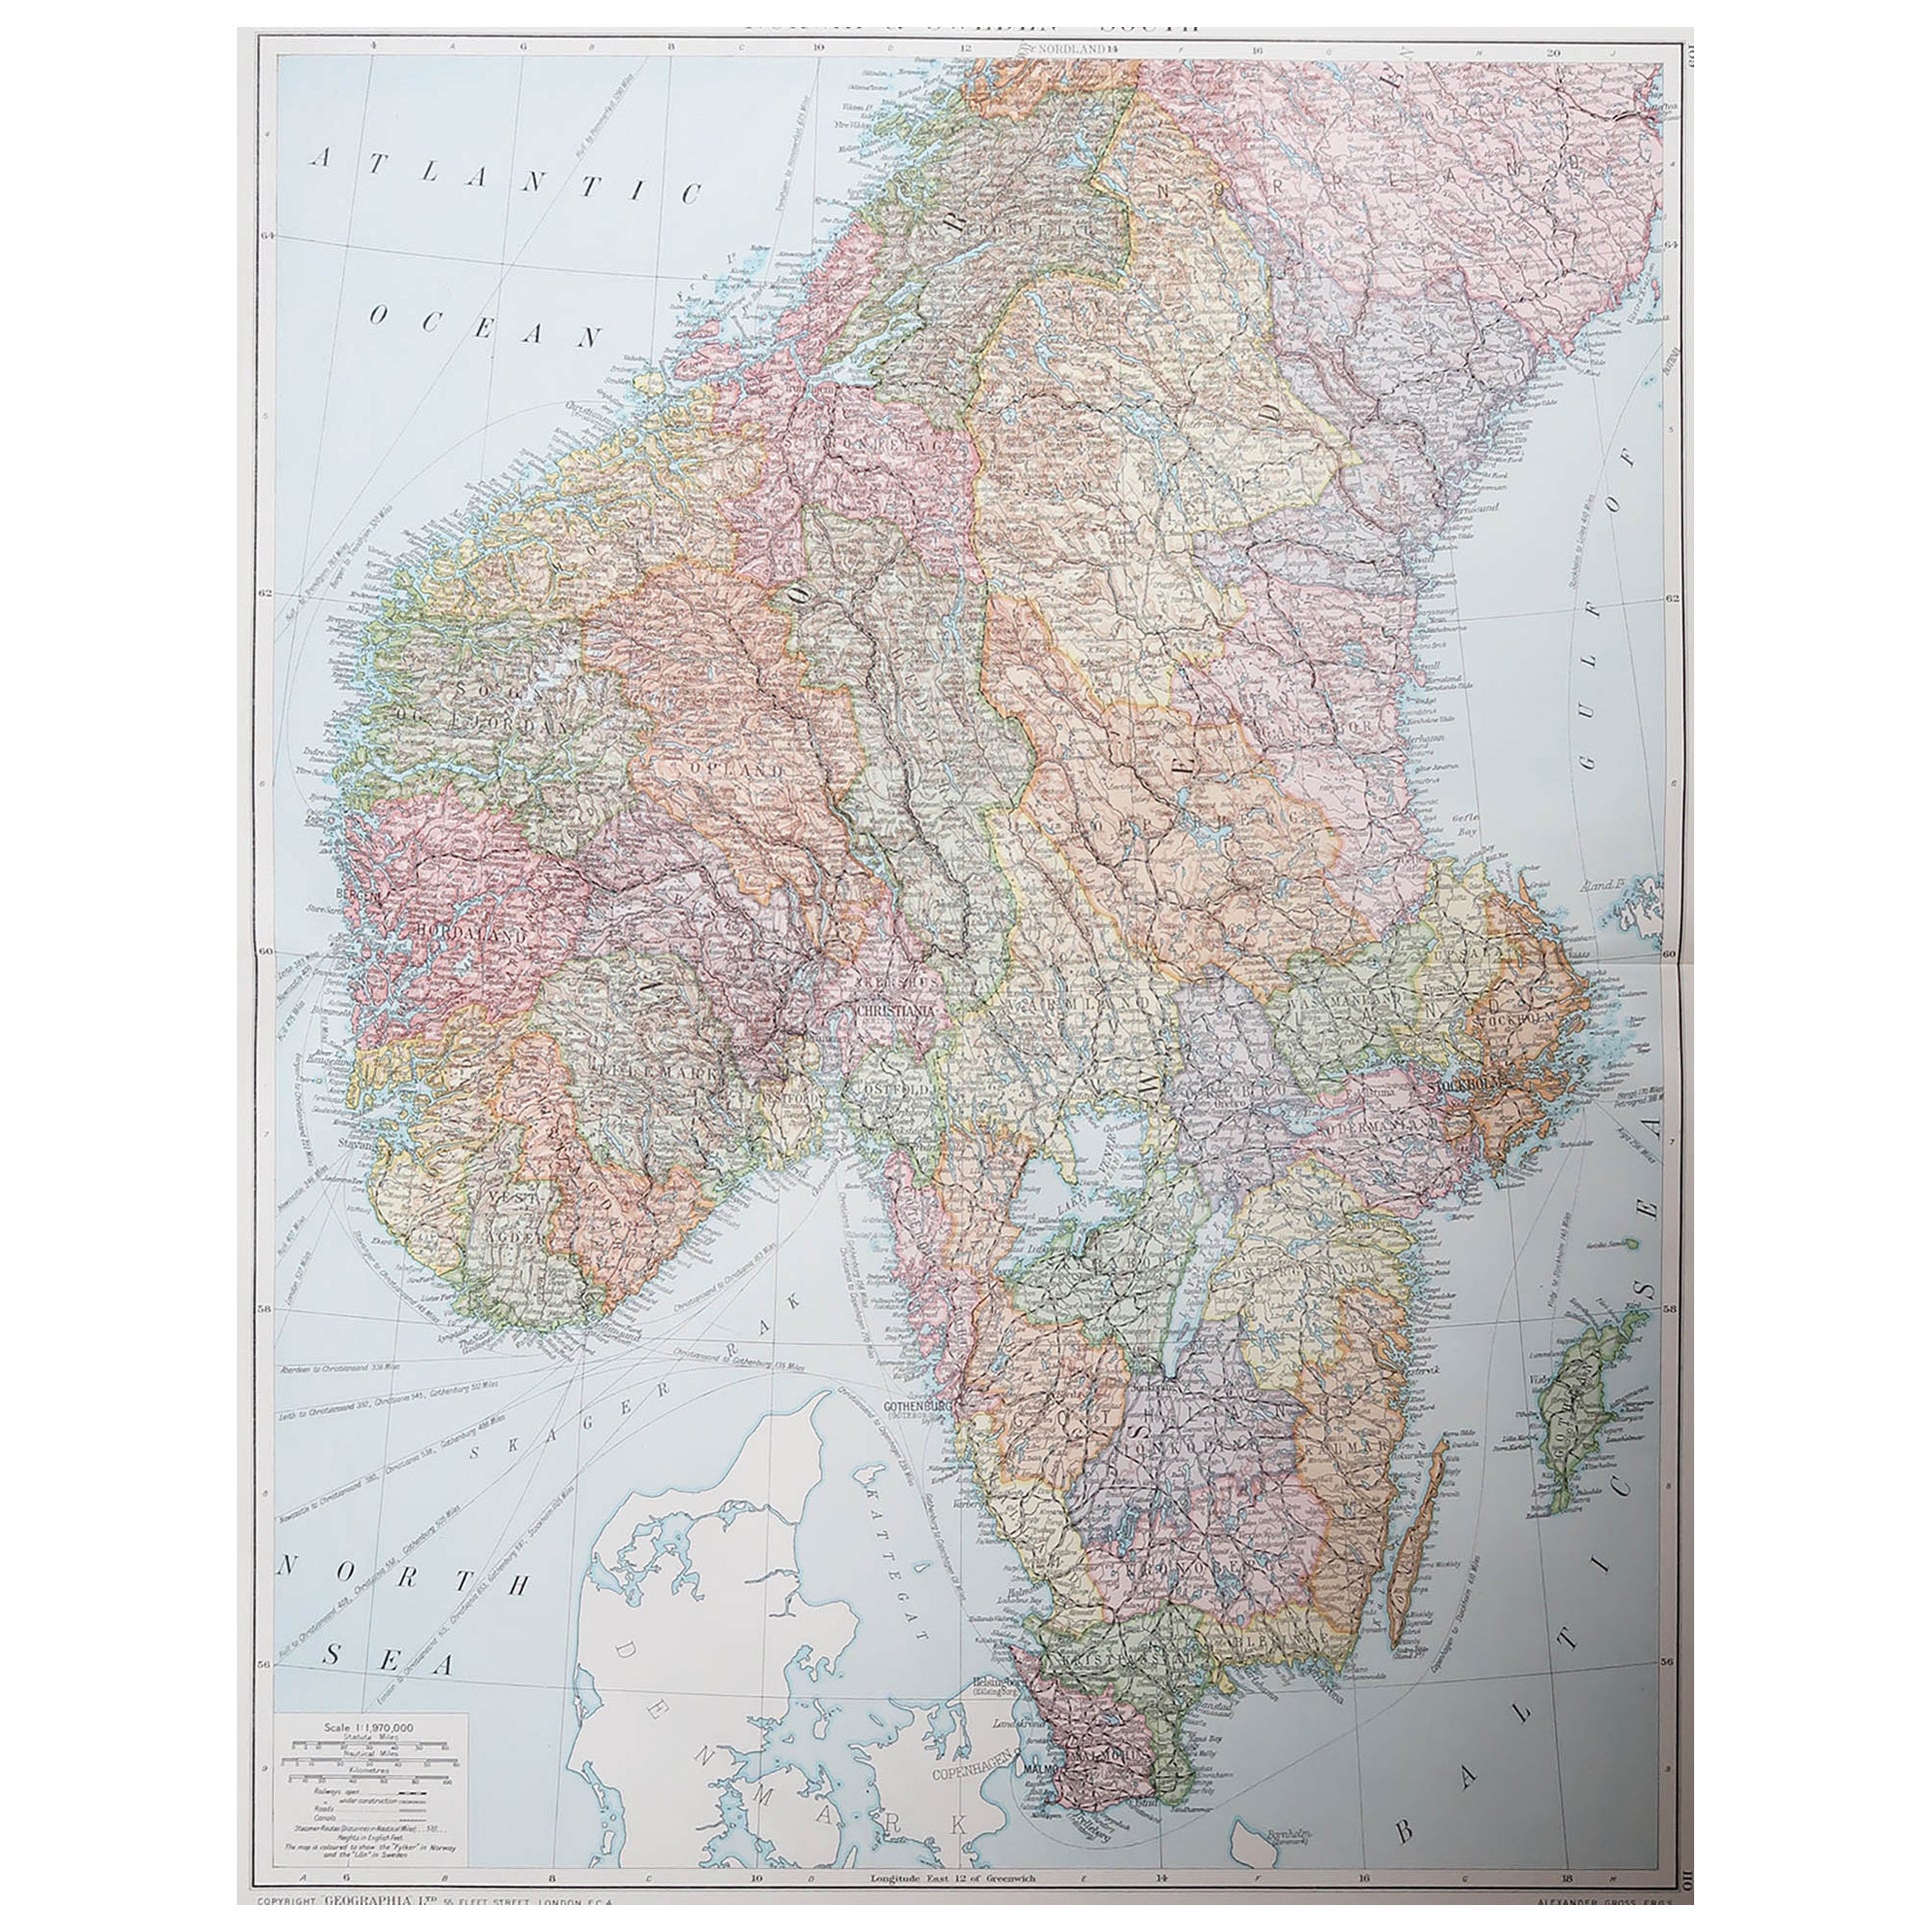 Large Original Vintage Map of Sweden and Norway circa 1920